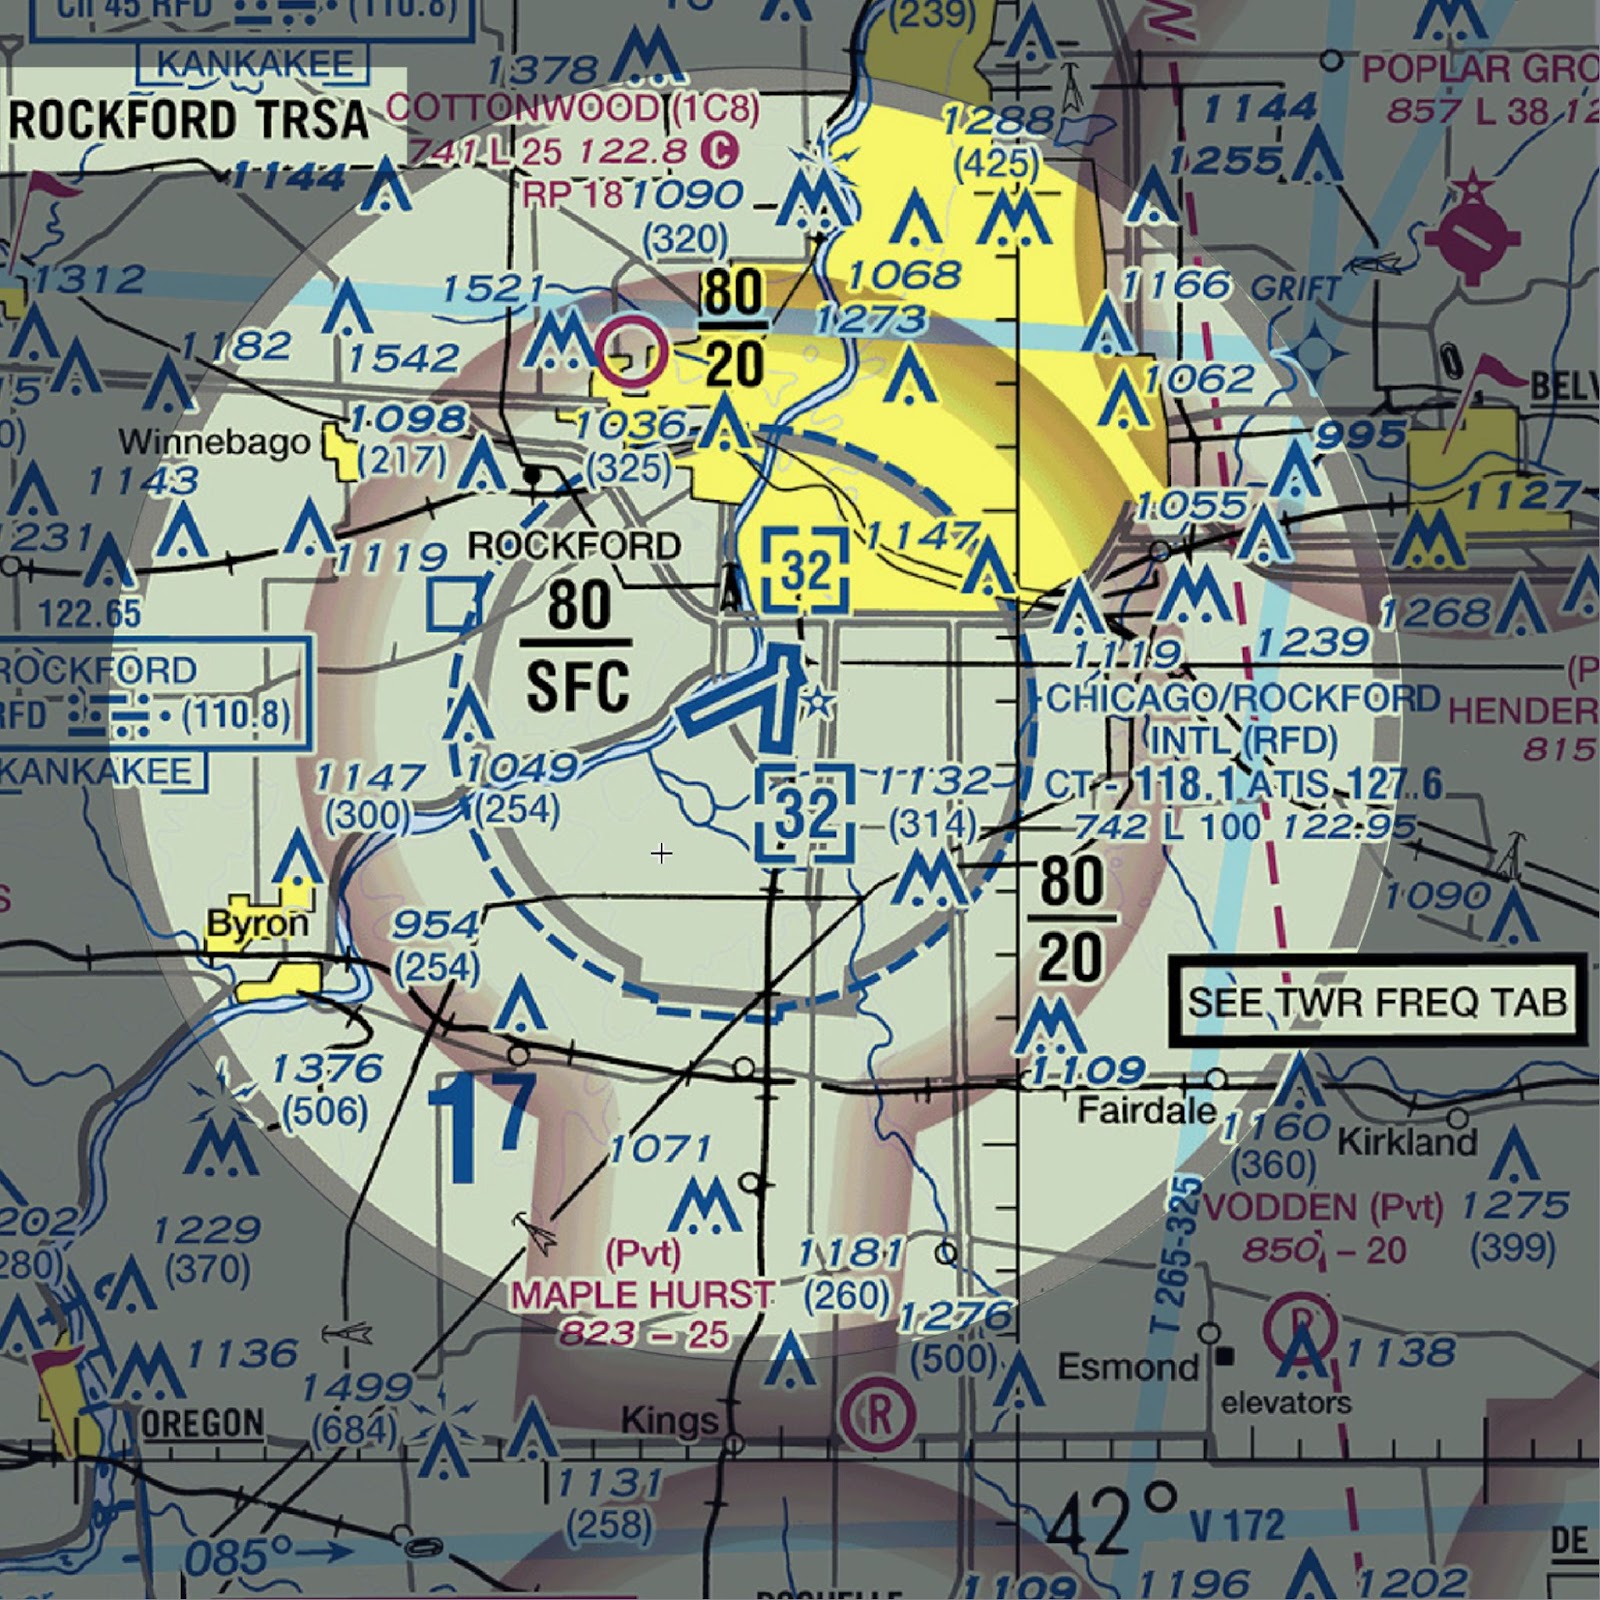 A diagram depicting a Terminal Radar Service Area (TRSA) on a sectional chart.